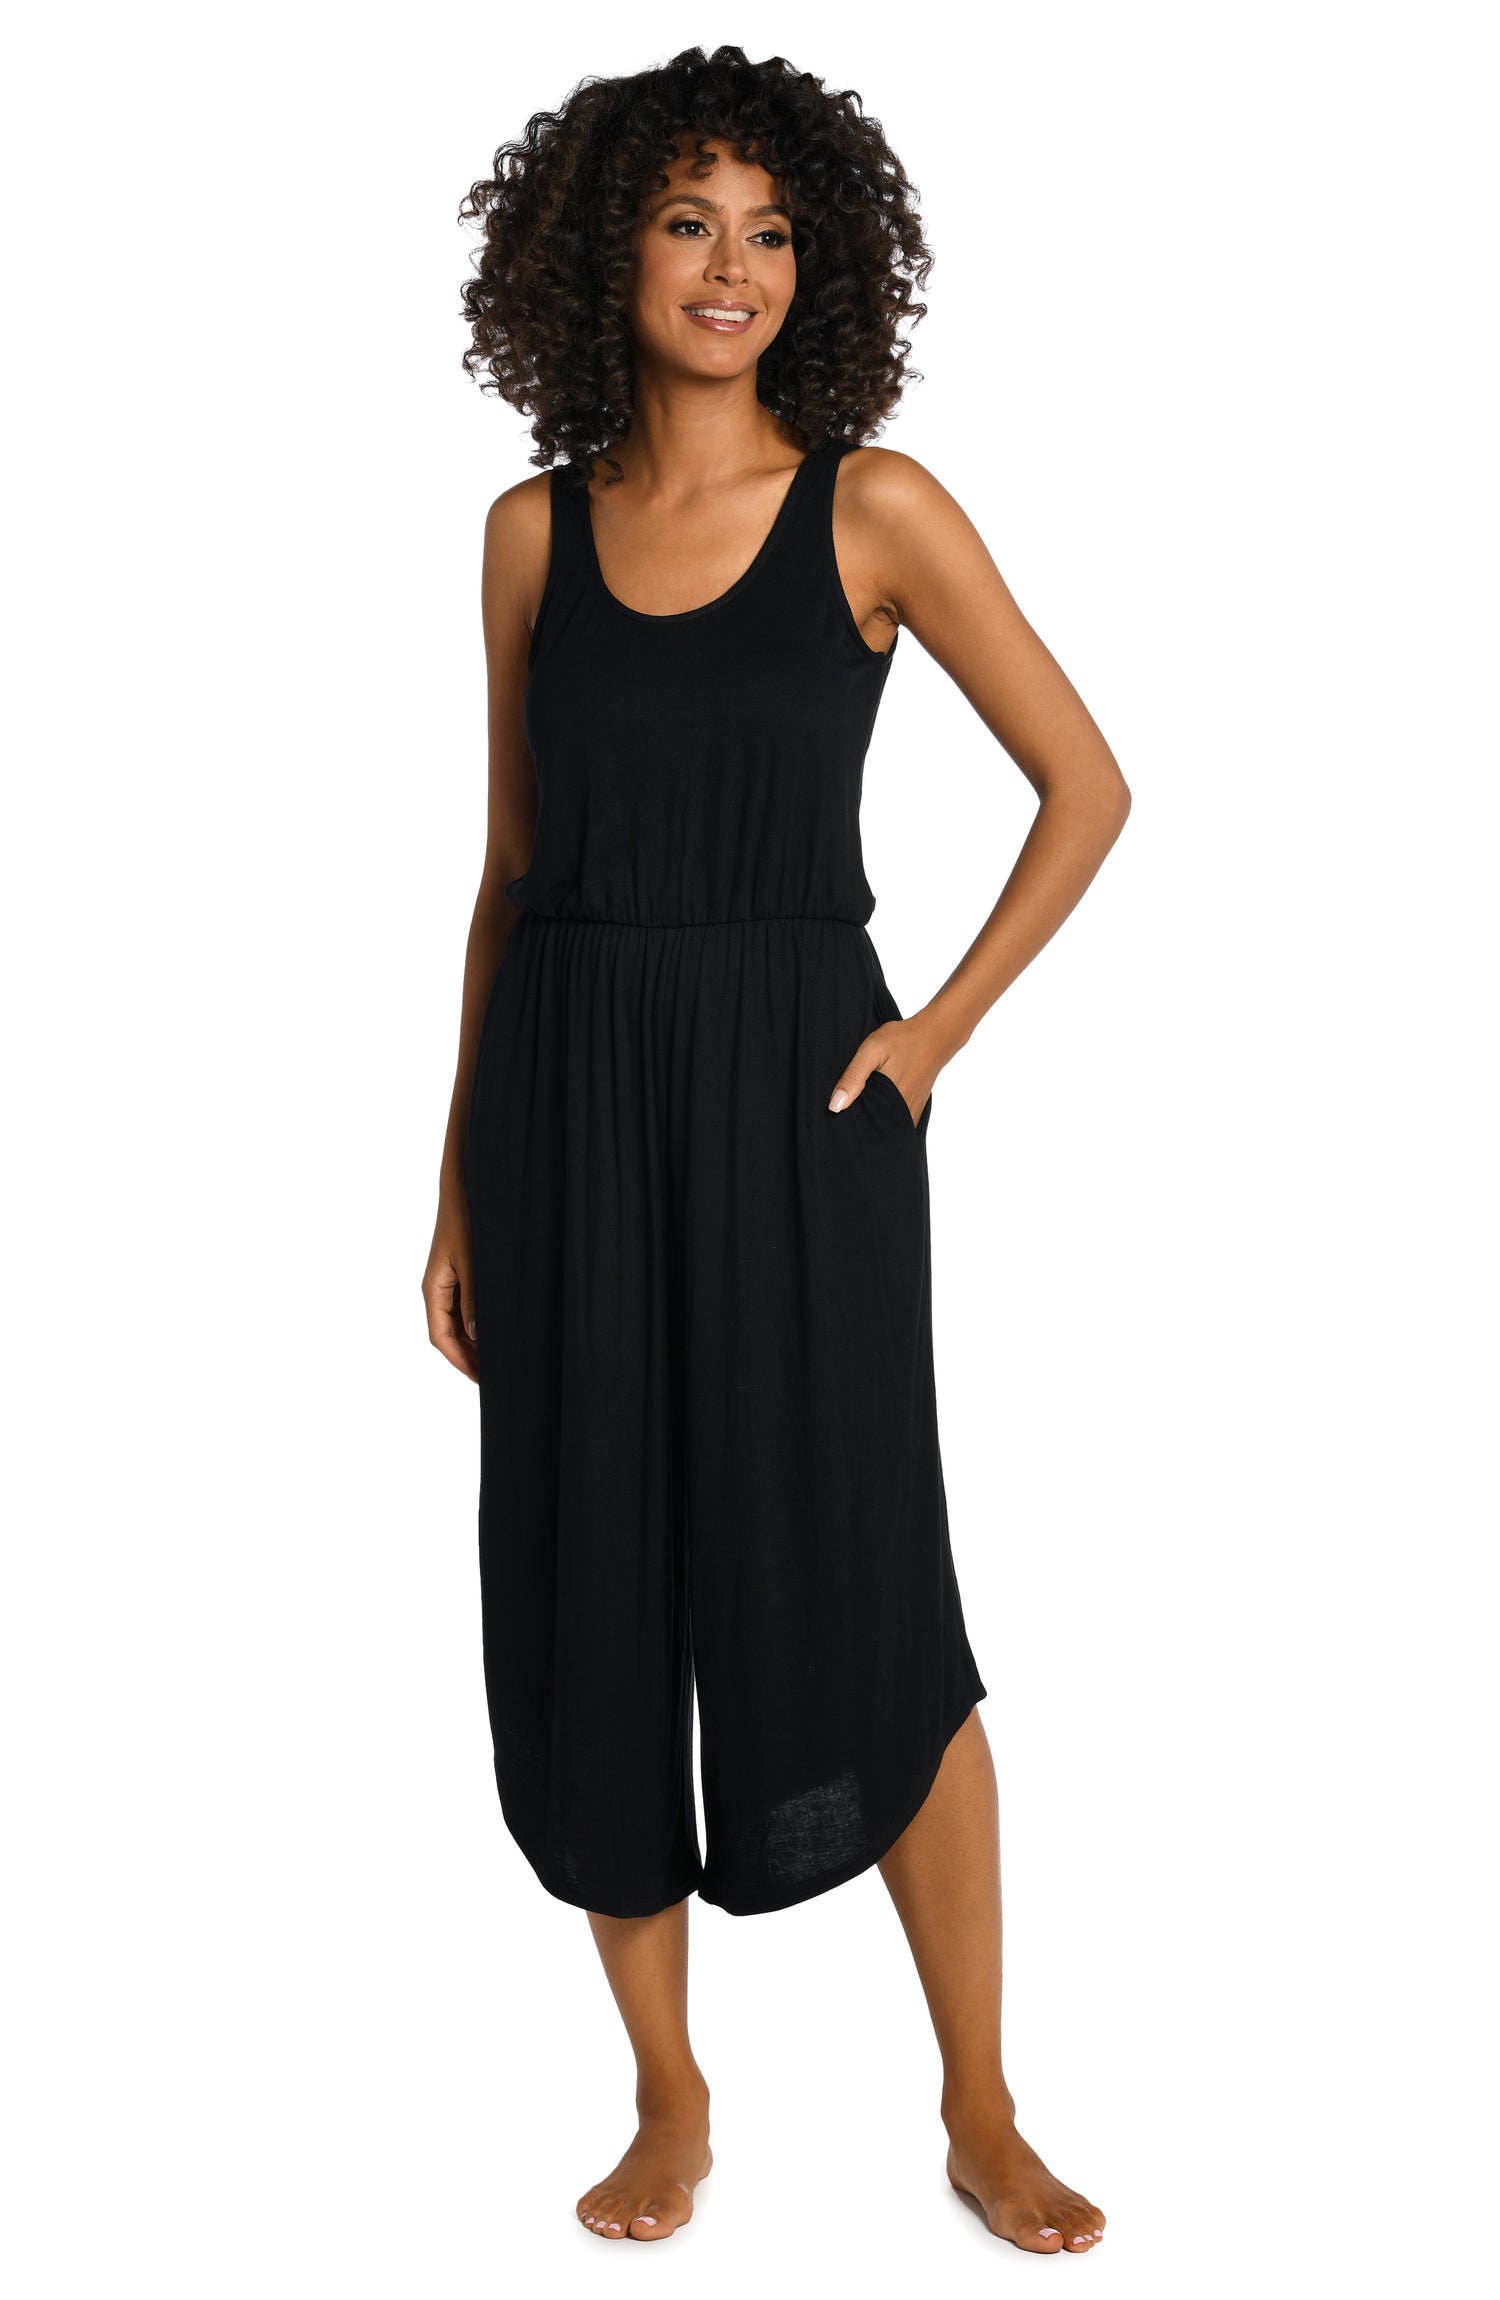 Model is wearing a black jumpsuit swimsuit cover up from our Draped Darling collection.